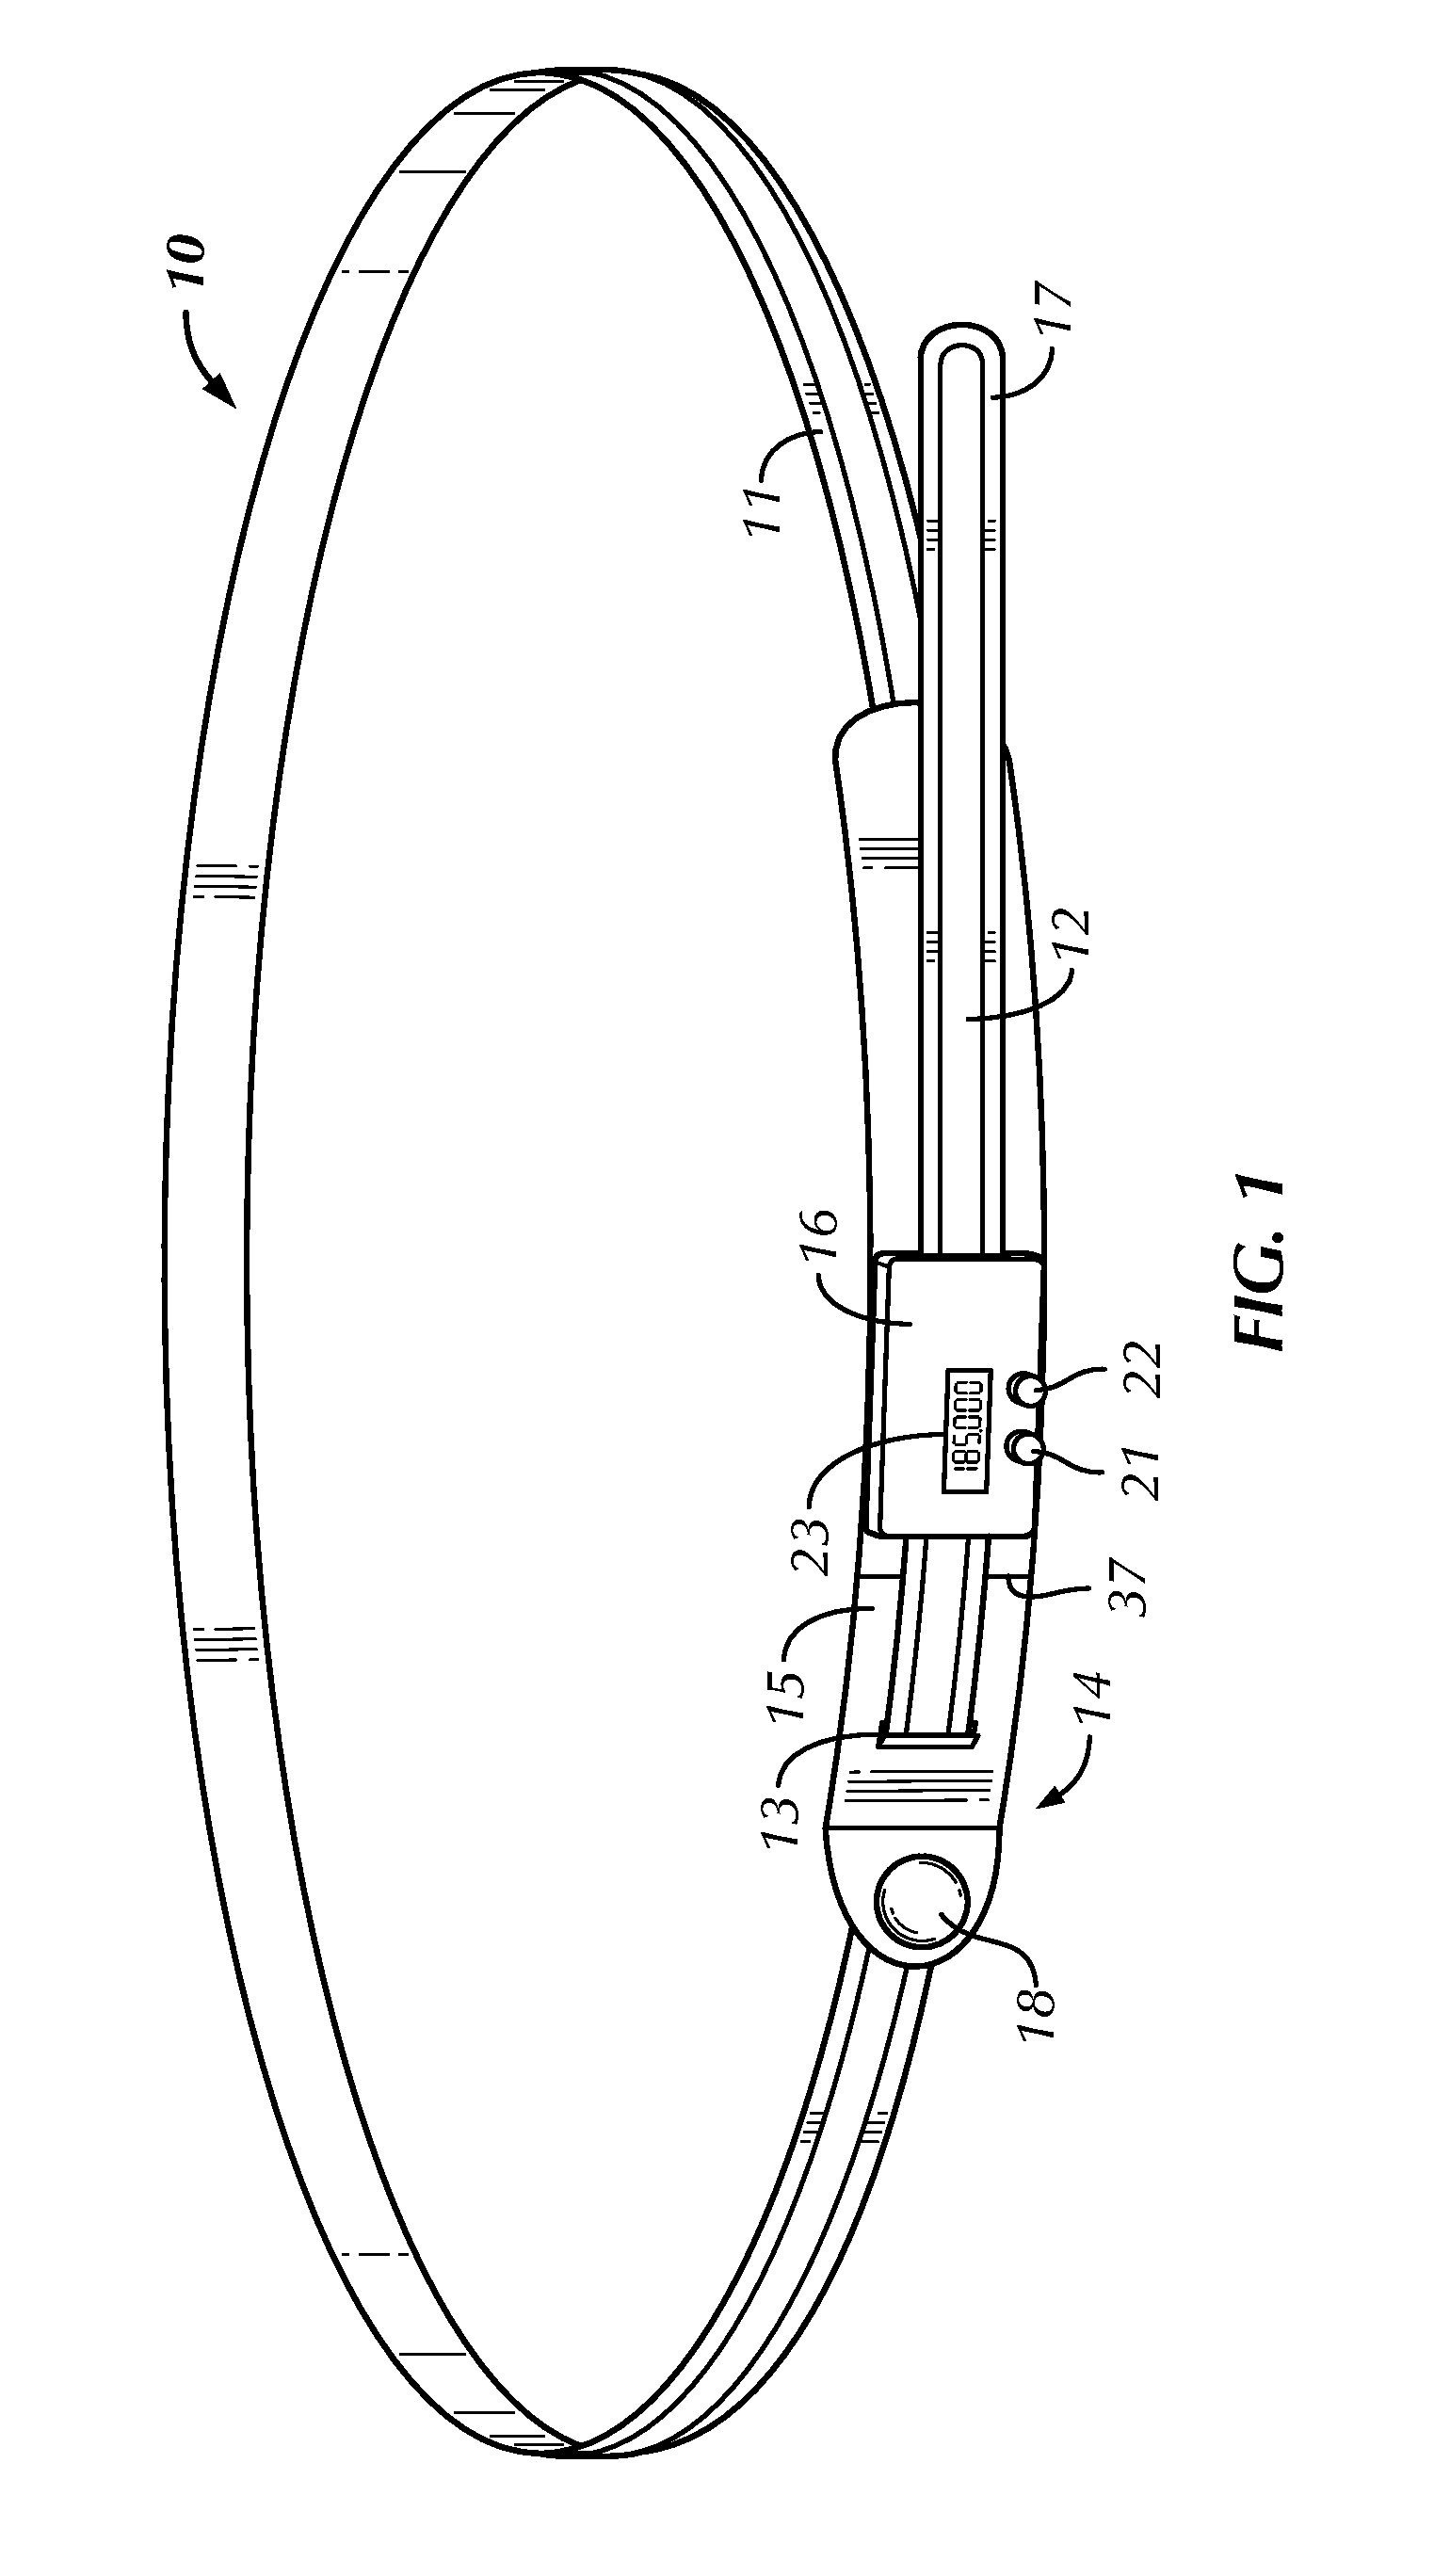 Optical readout device to provide visual information